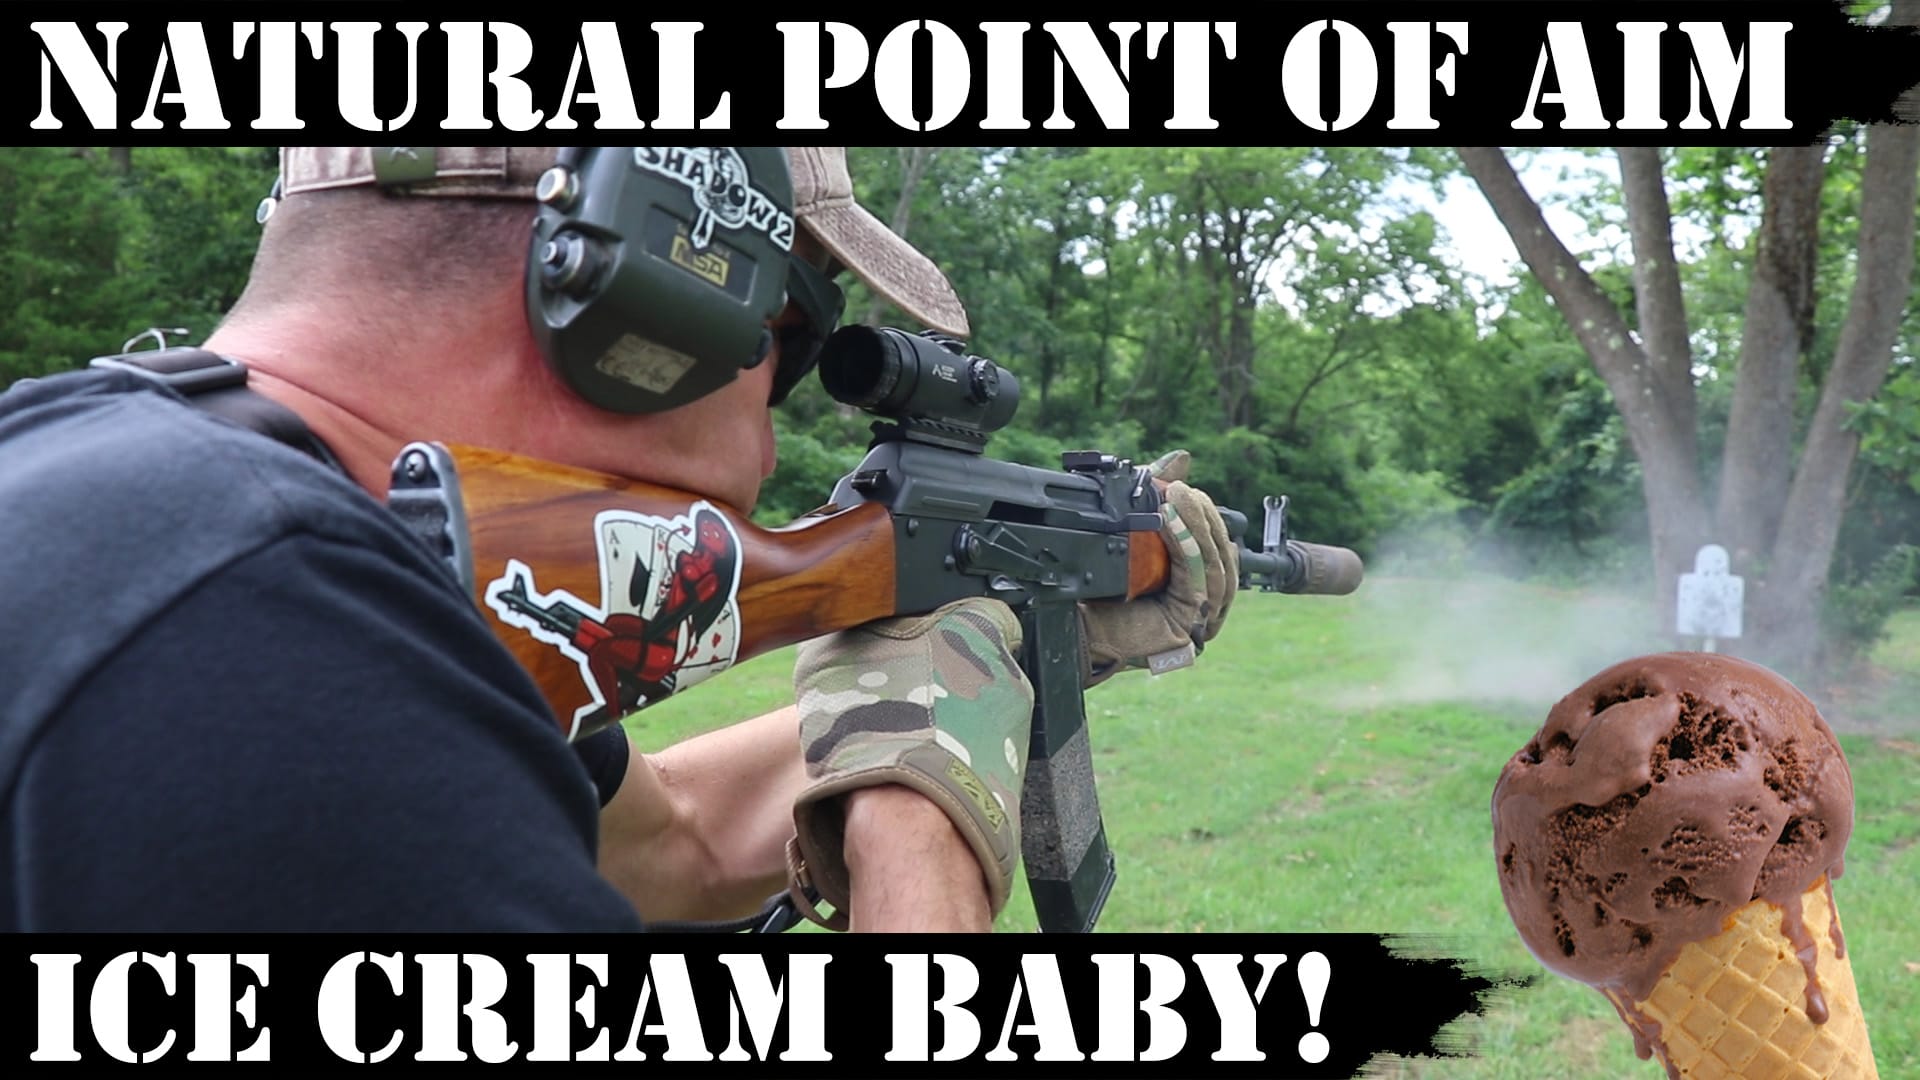 Natural Point of Aim – Ice Cream Baby!